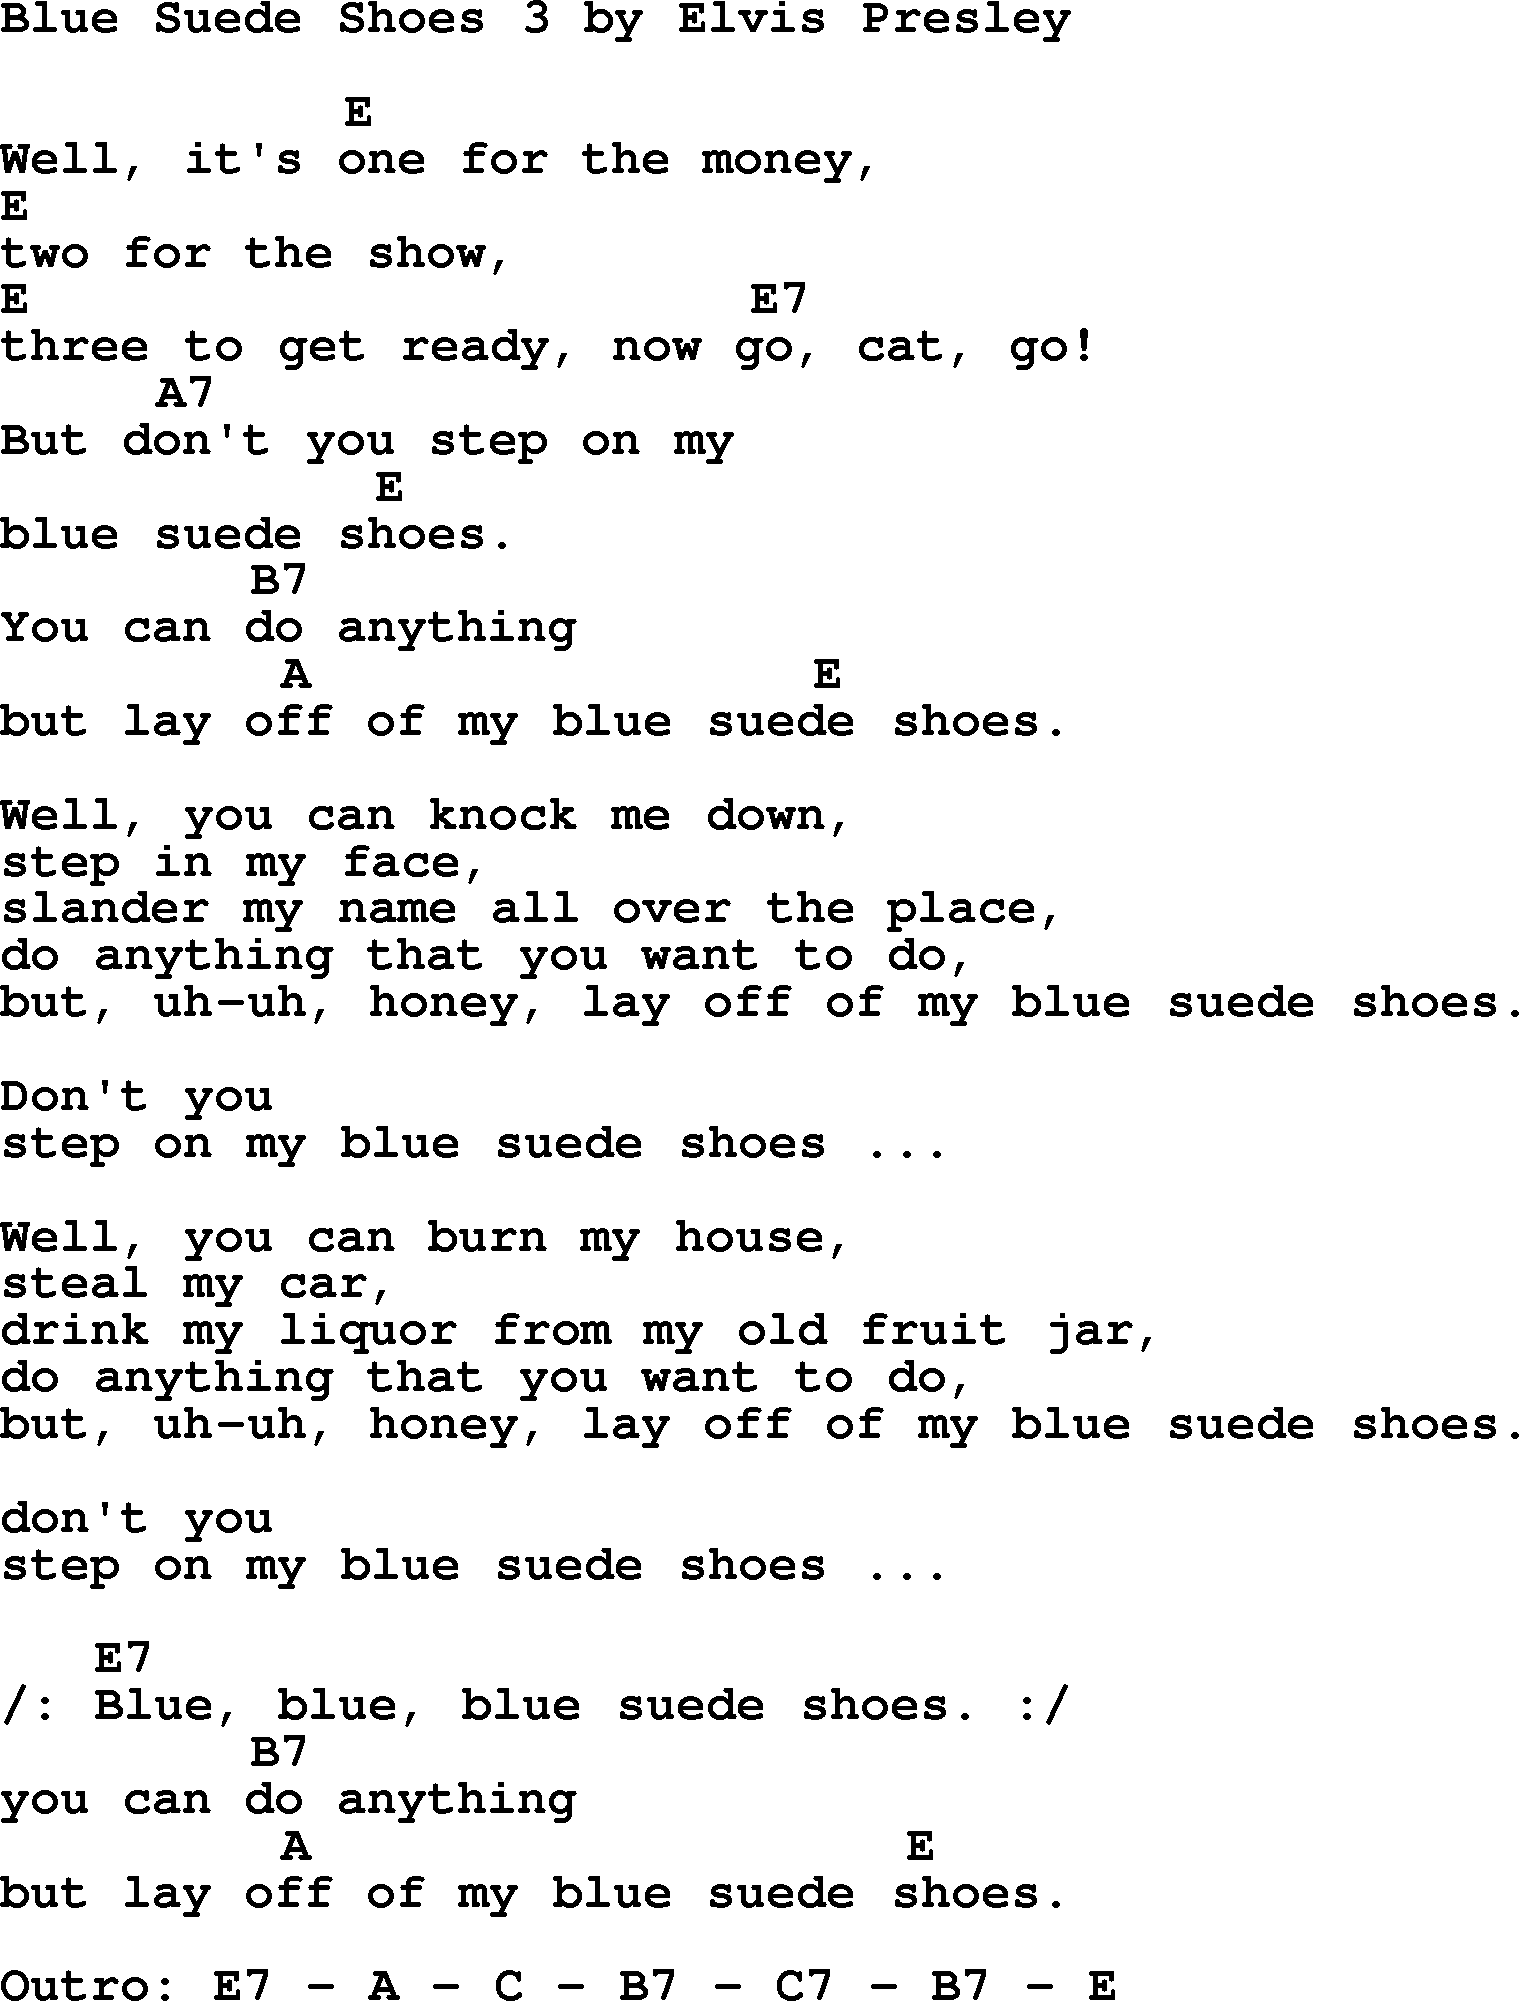 Elvis Presley song: Blue Suede Shoes 3, lyrics and chords